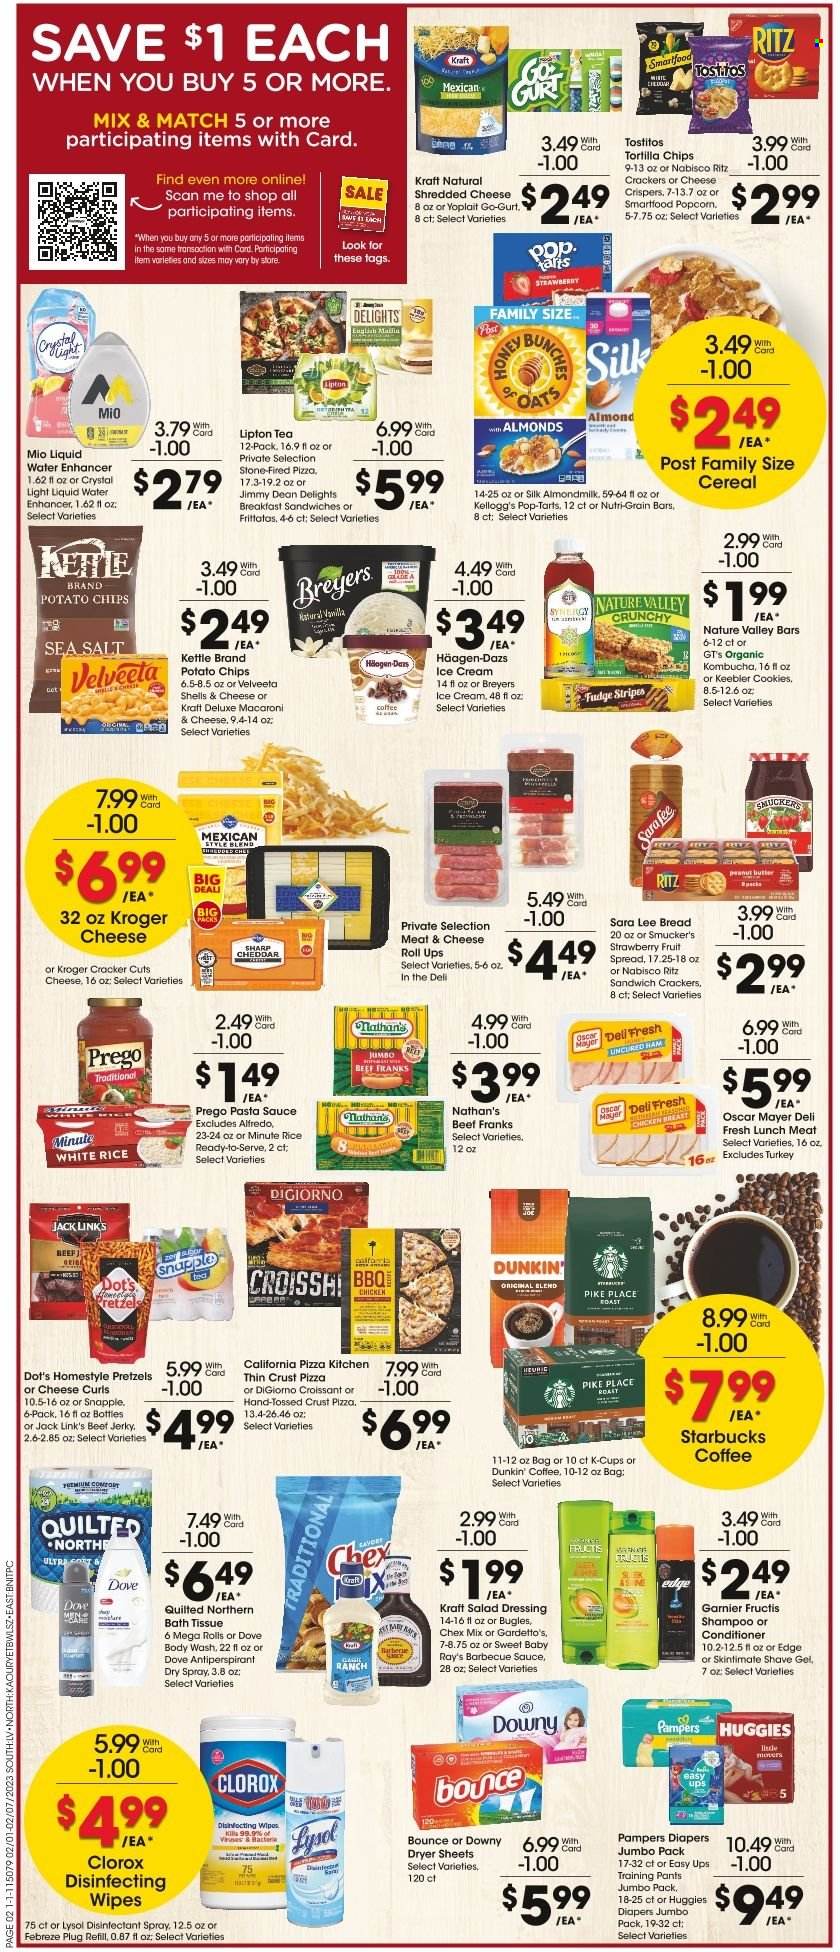 thumbnail - Fred Meyer Flyer - 02/01/2023 - 02/07/2023 - Sales products - Dell, bread, pretzels, Sara Lee, macaroni & cheese, pizza, pasta sauce, Kraft®, Jimmy Dean, beef jerky, uncured ham, ham, jerky, Oscar Mayer, lunch meat, shredded cheese, Yoplait, almond milk, Silk, ice cream, Häagen-Dazs, cookies, Dove, fudge, crackers, Kellogg's, Pop-Tarts, Keebler, RITZ, tortilla chips, potato chips, chips, Smartfood, popcorn, cheese rolls, Tostitos, Jack Link's, Chex Mix, cereals, Nature Valley, Nutri-Grain, rice, white rice, BBQ sauce, salad dressing, dressing, peanut butter, Lipton, Snapple, kombucha, tea, Starbucks, coffee capsules, K-Cups, chicken breasts, wipes, Huggies, Pampers, pants, nappies, baby pants, bath tissue, Quilted Northern, Febreze, desinfection, Lysol, Clorox, dryer sheets, Downy Laundry, body wash, shampoo, Garnier, conditioner, Fructis, anti-perspirant, shave gel, antibacterial spray. Page 2.